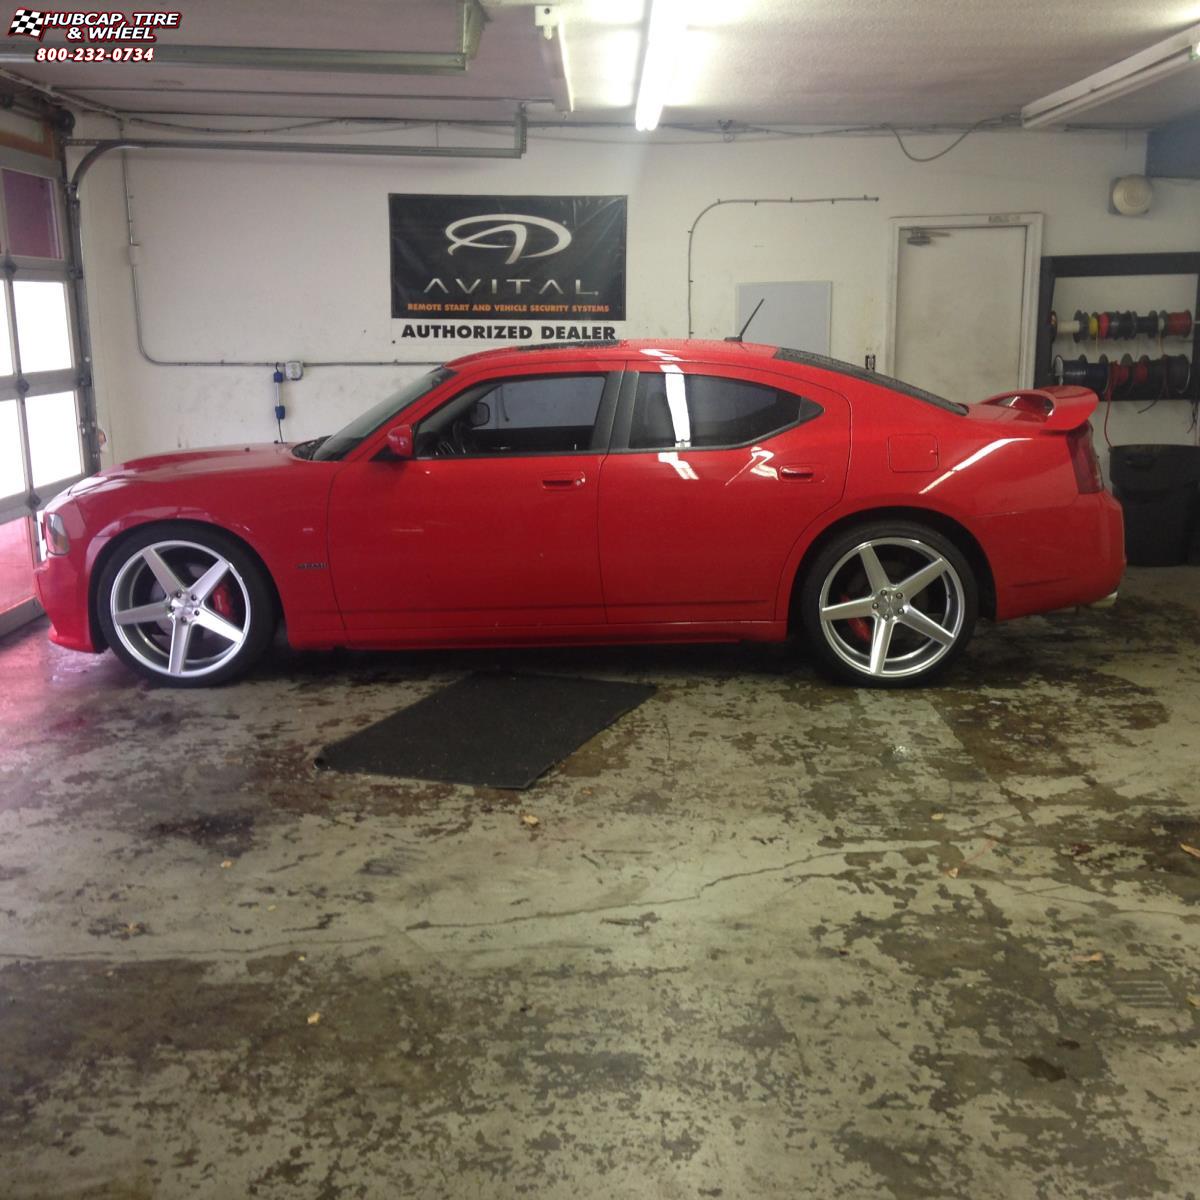 vehicle gallery/2009 dodge charger xd series km685 district 22x9   wheels and rims